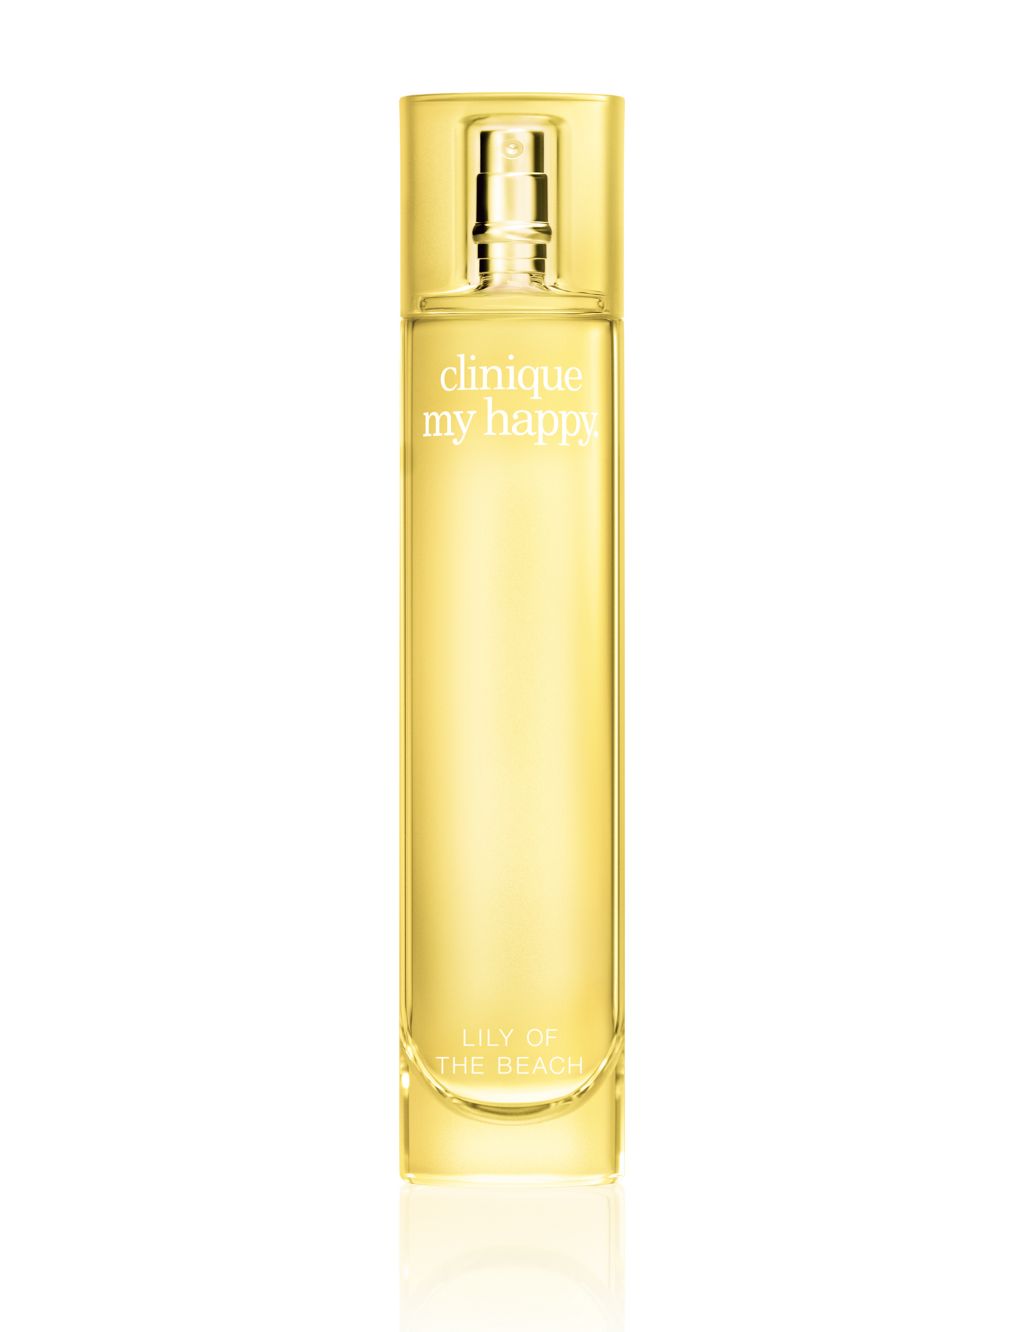 Clinique My Happy™ Lily of the Beach 15ml